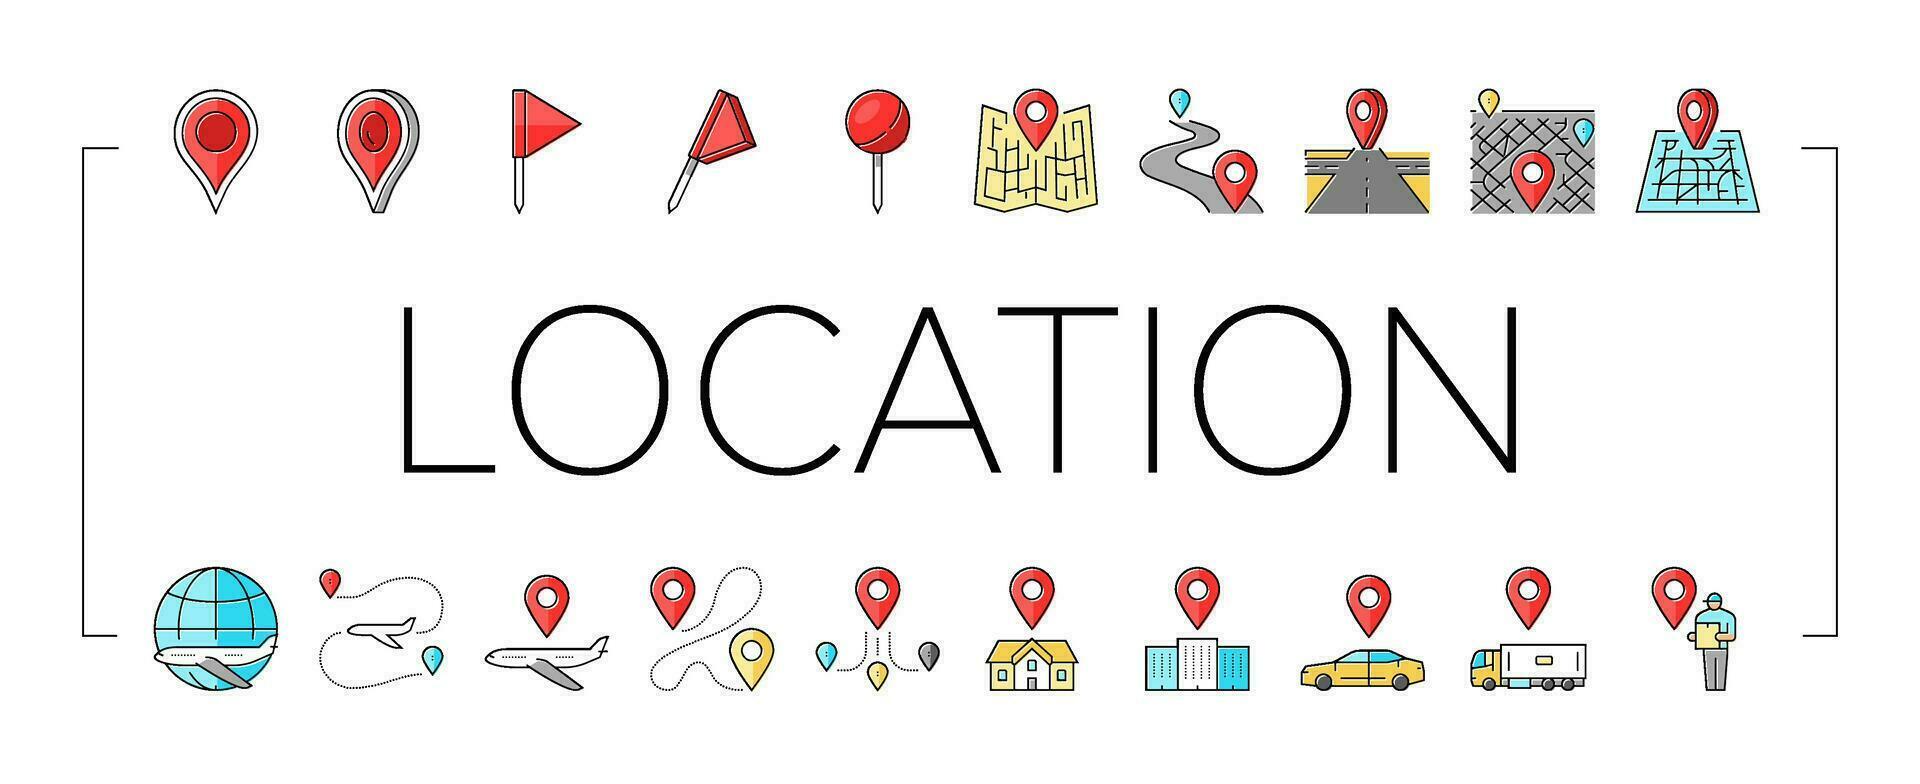 location pin map point icons set vector